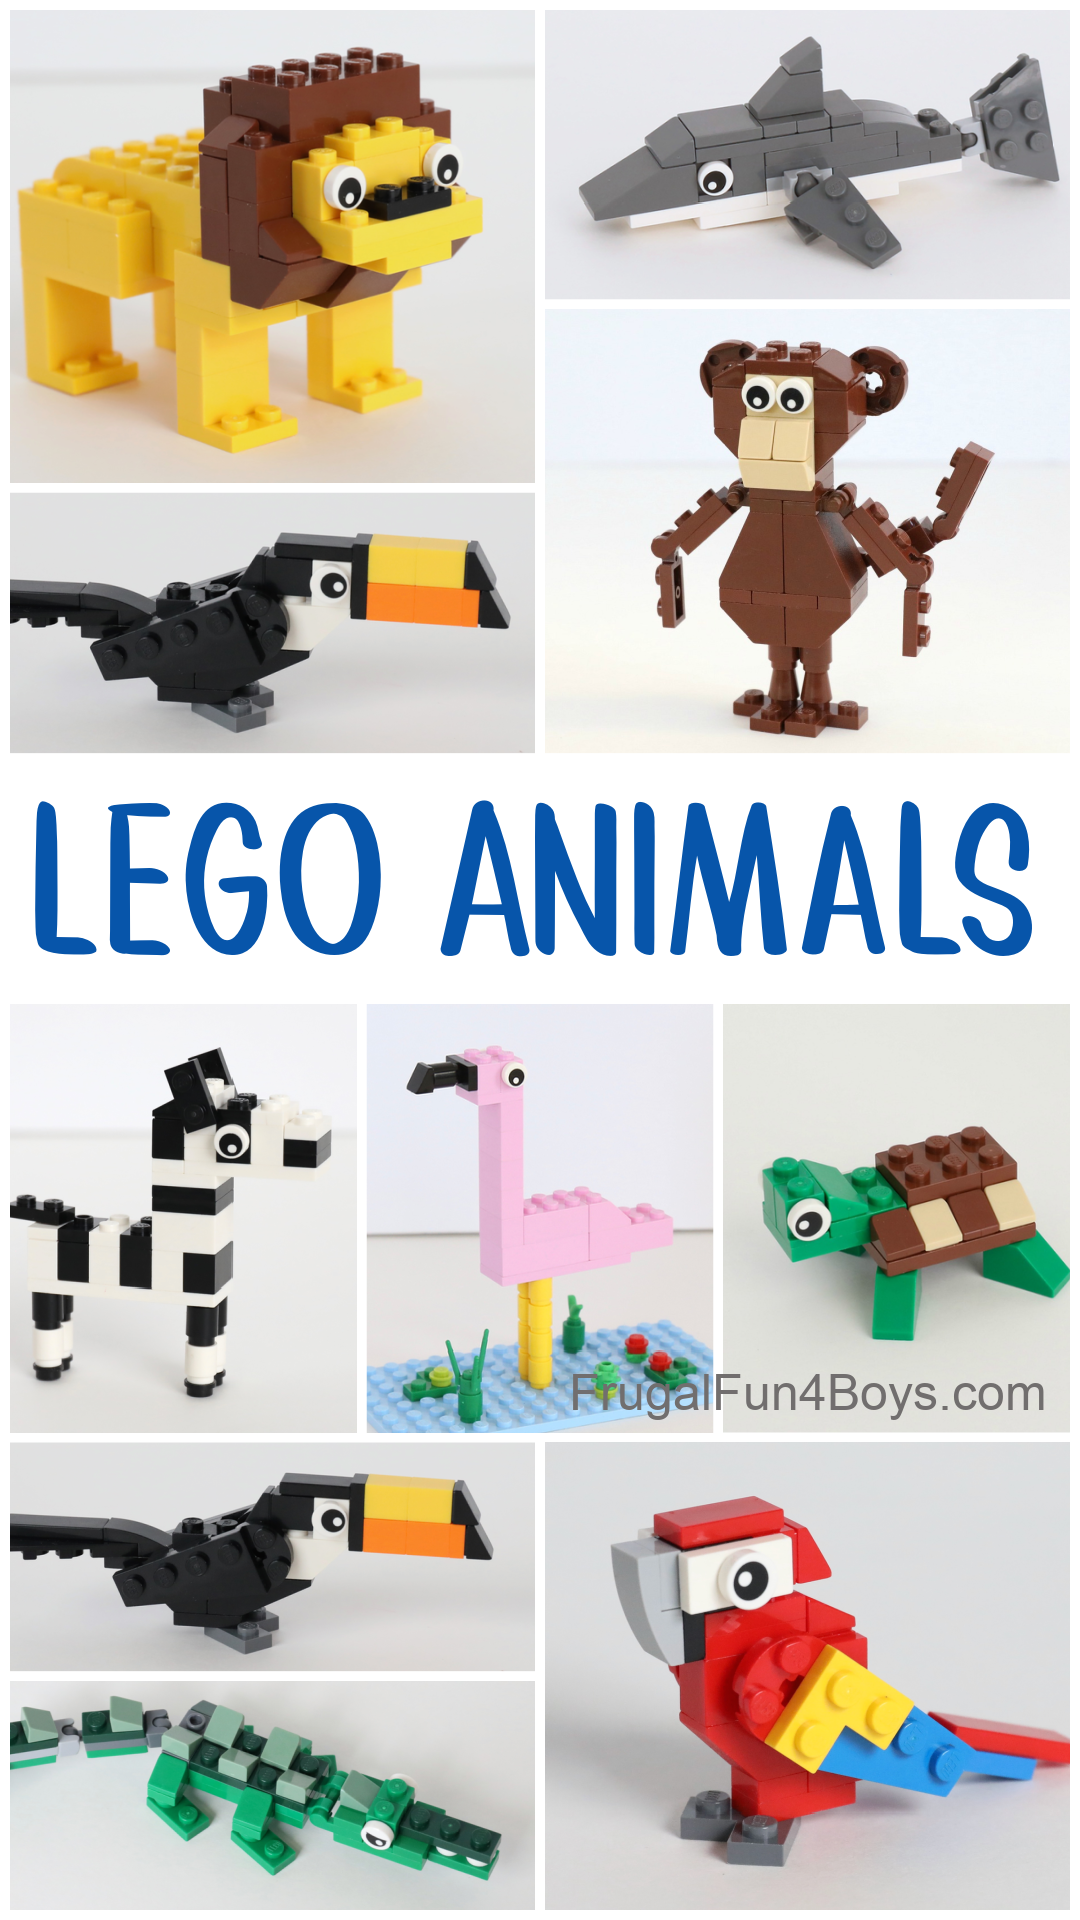 How to Build Awesome LEGO Animals - Frugal Fun For Boys and Girls